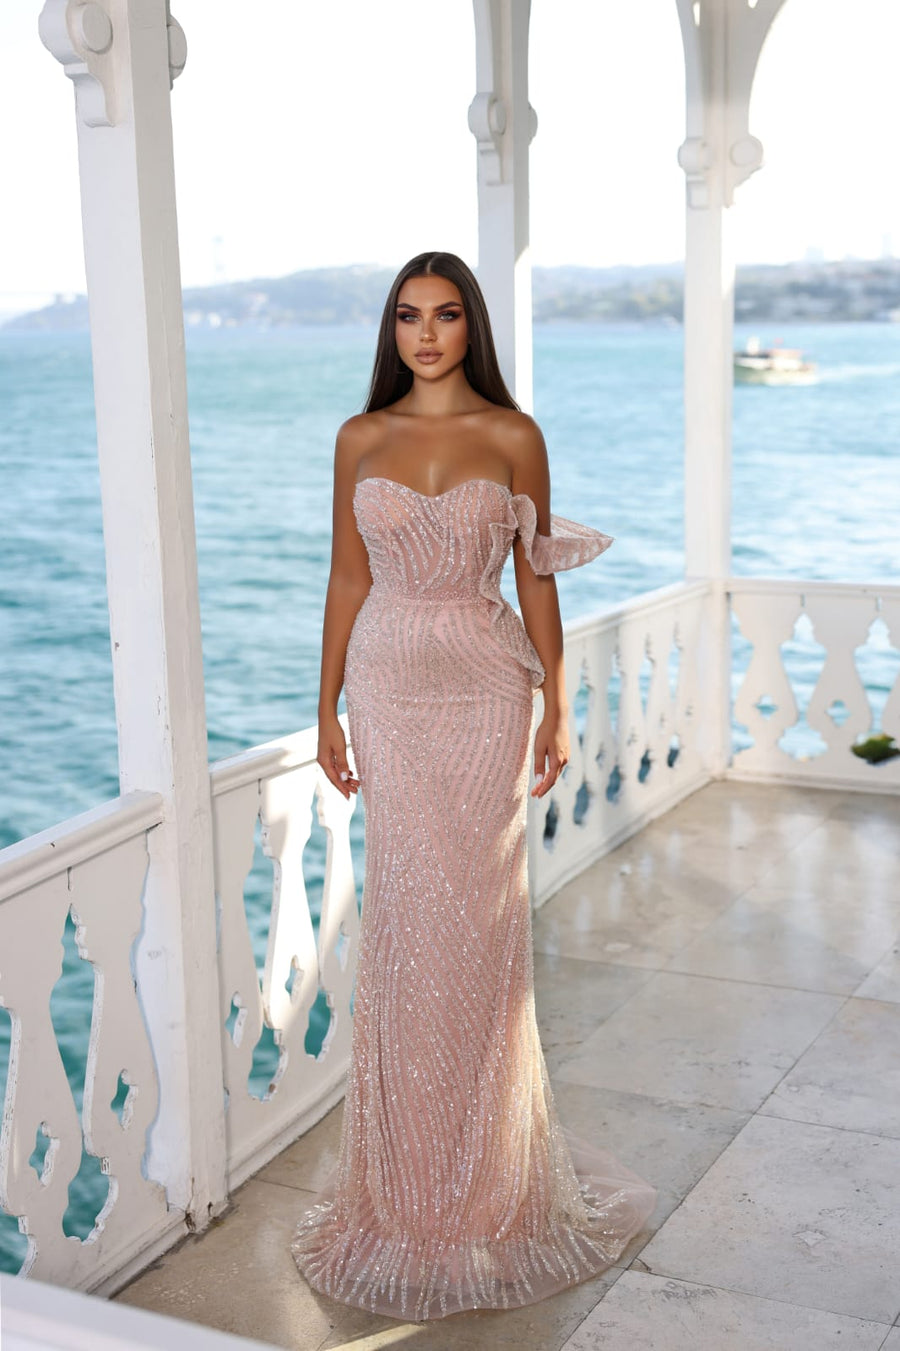 BEADED GOWN WITH SHOULDER PEPLUM DETAIL